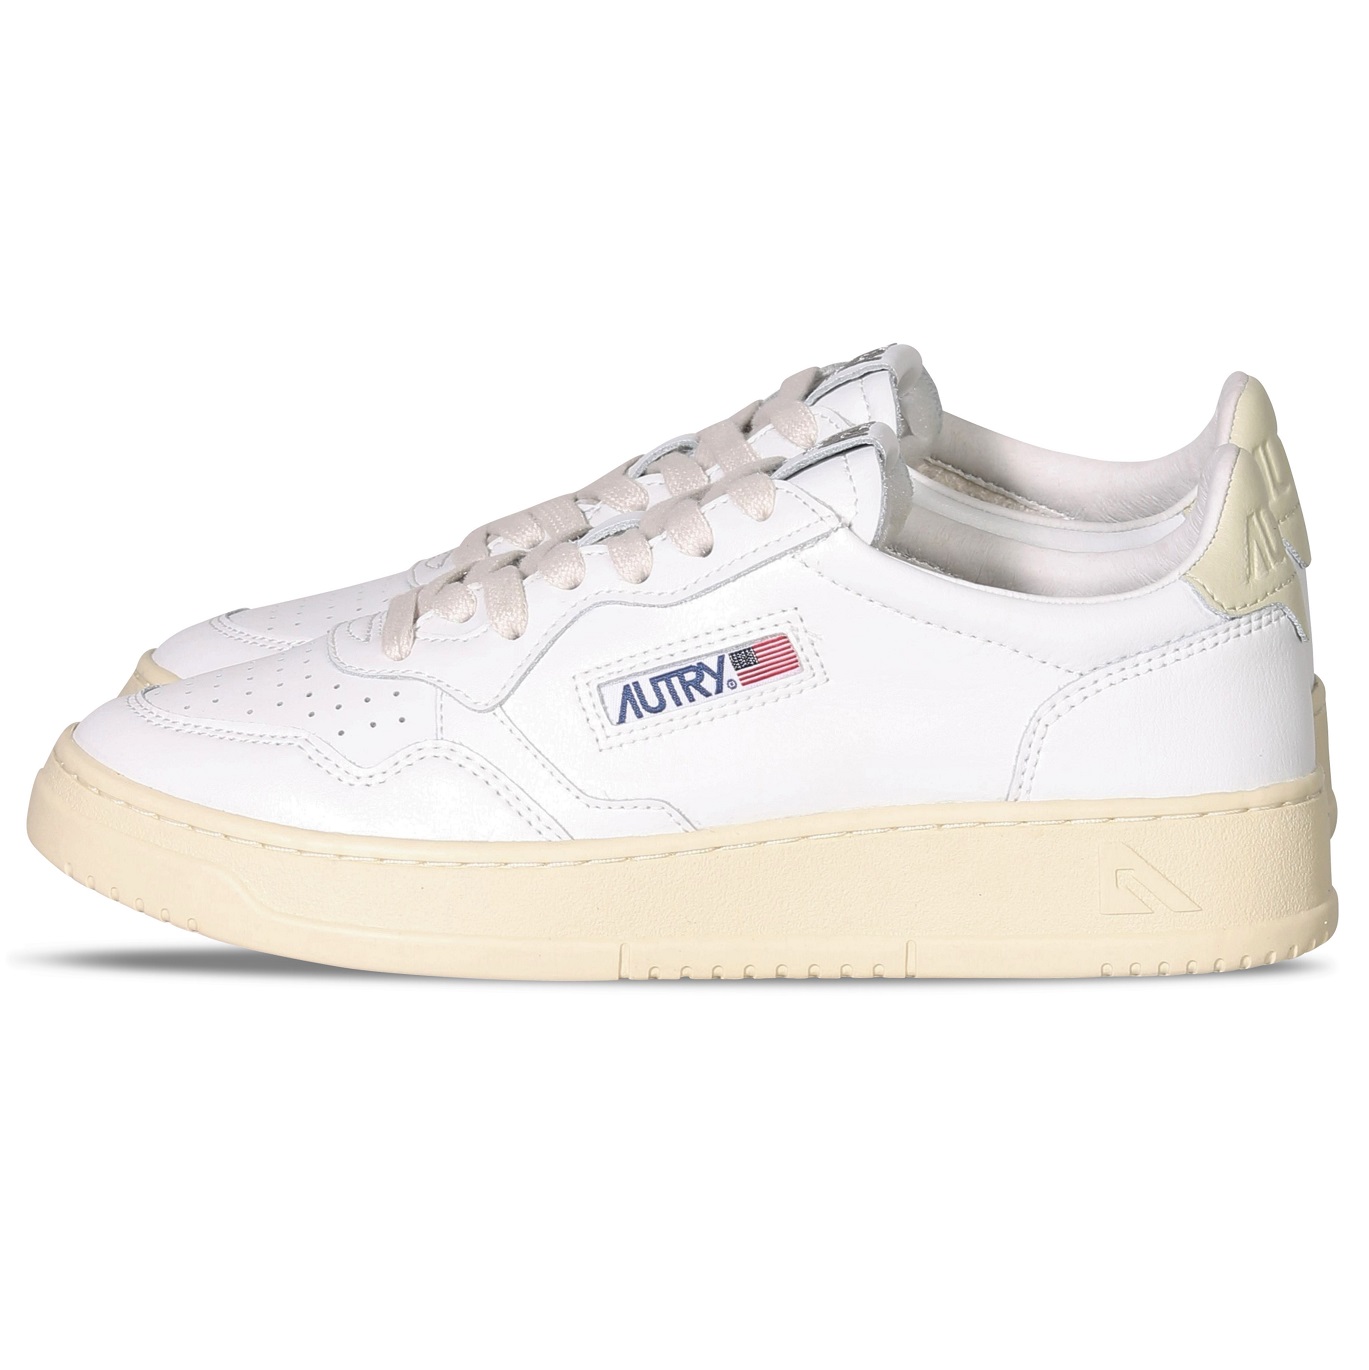 AUTRY ACTION SHOES Sneaker Low in White/Beige 38